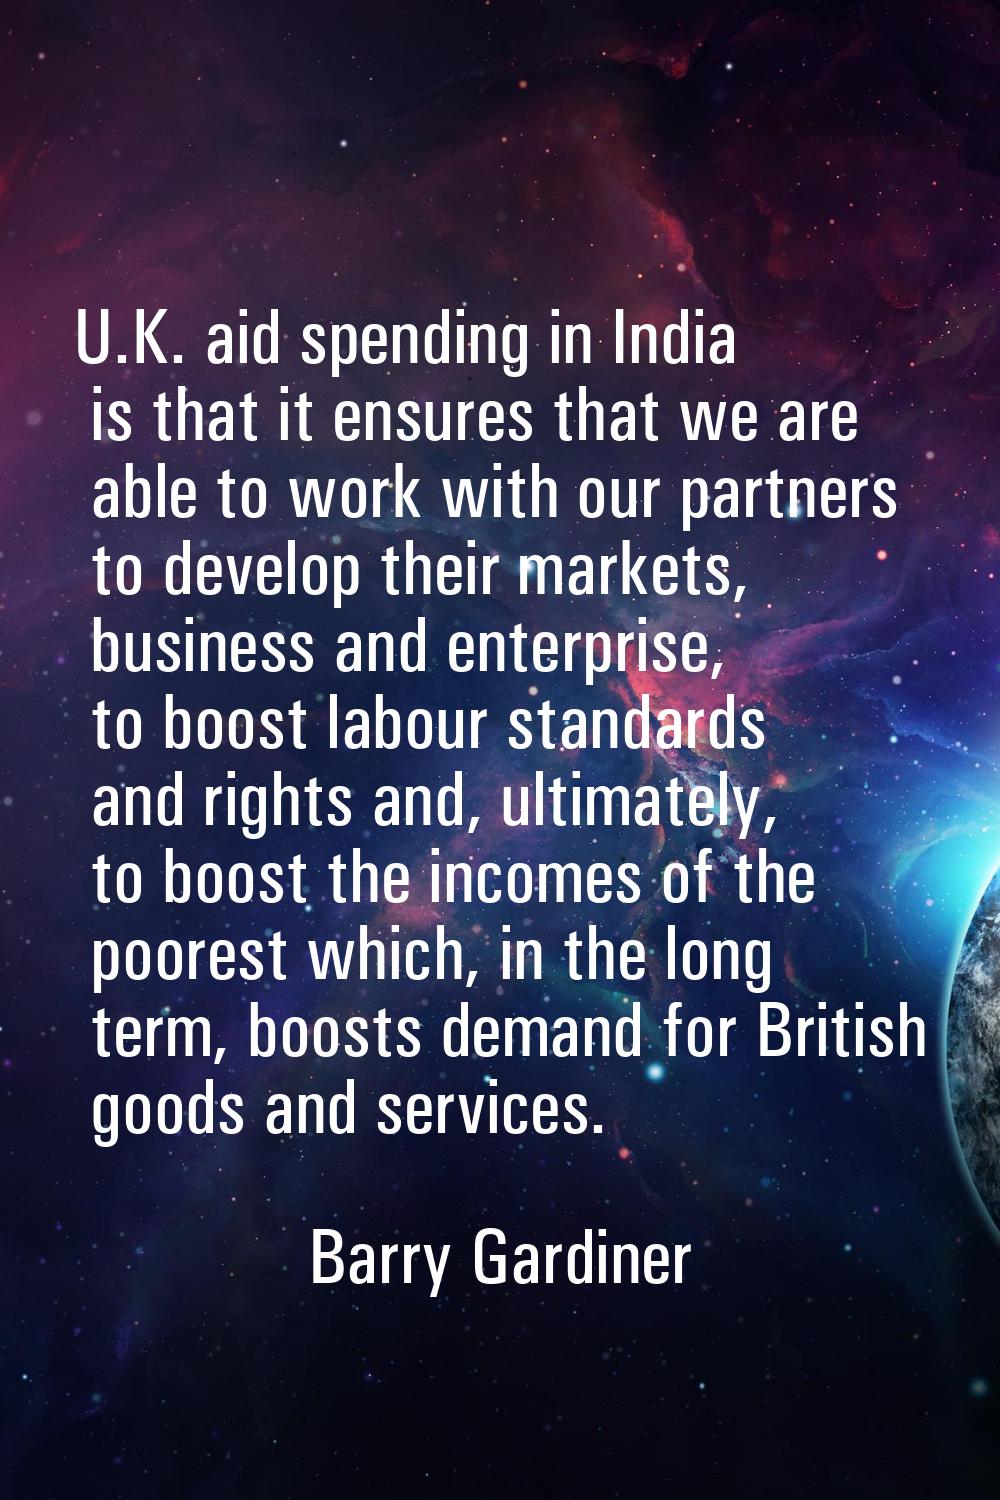 U.K. aid spending in India is that it ensures that we are able to work with our partners to develop